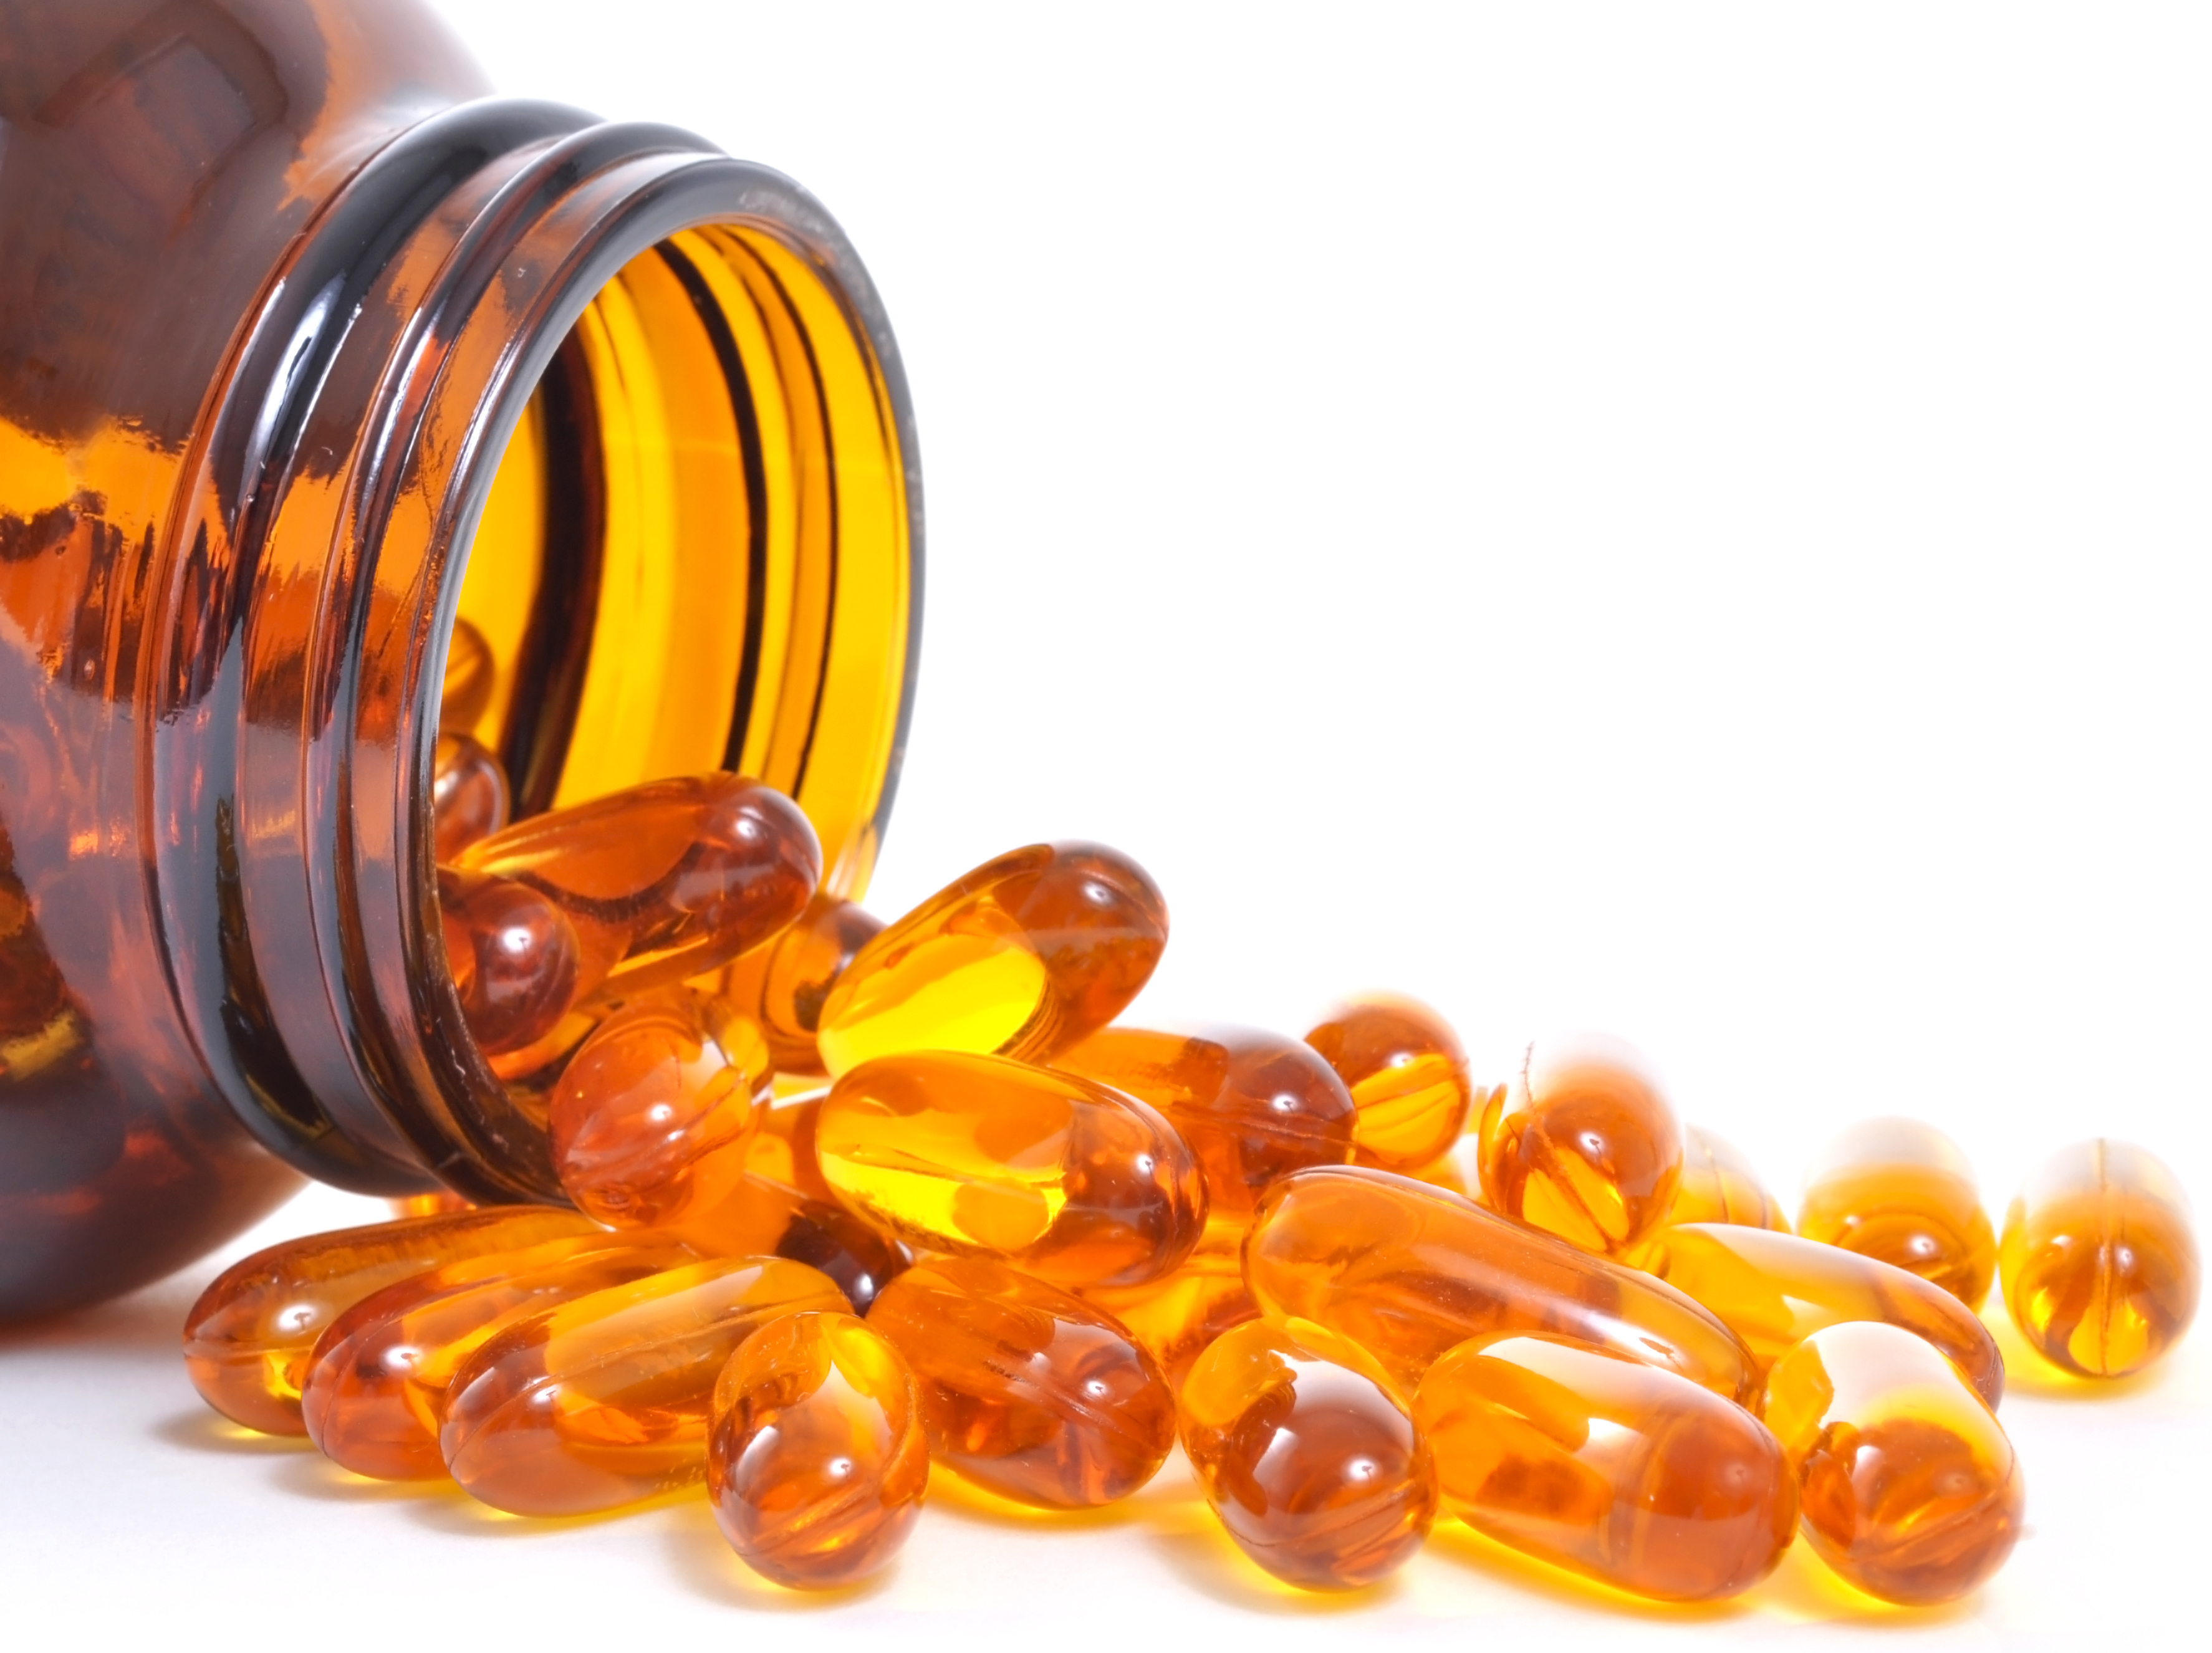 cod_liver__oil_bottle_and_capsules